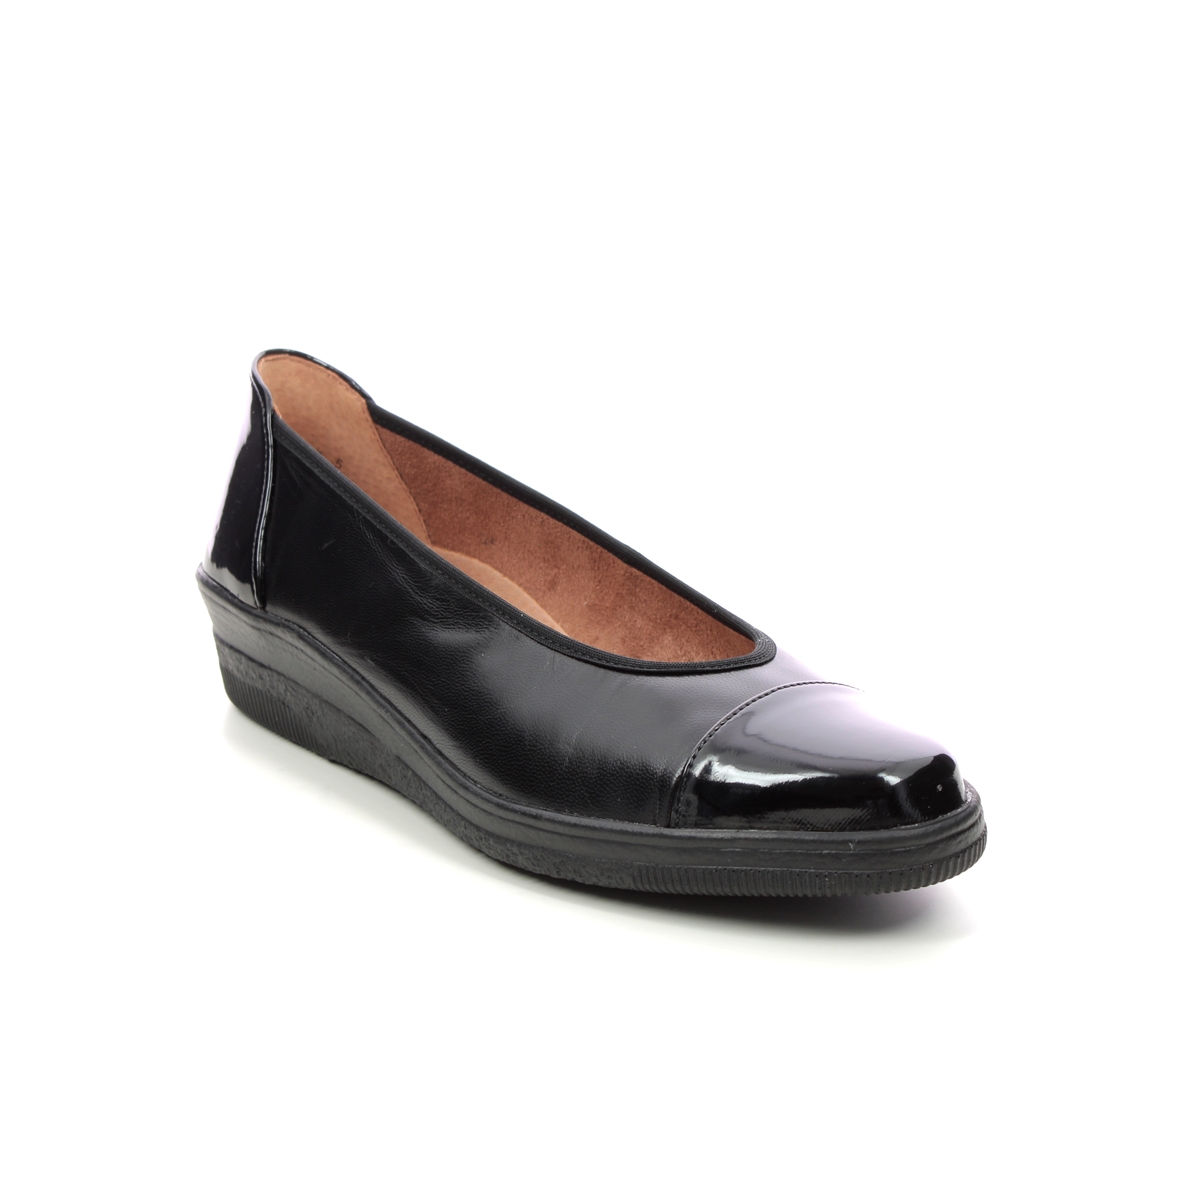 Gabor Petunia Black Patent Leather Womens Comfort Slip On Shoes 06.402.37 in a Plain Leather and Man-made in Size 6.5